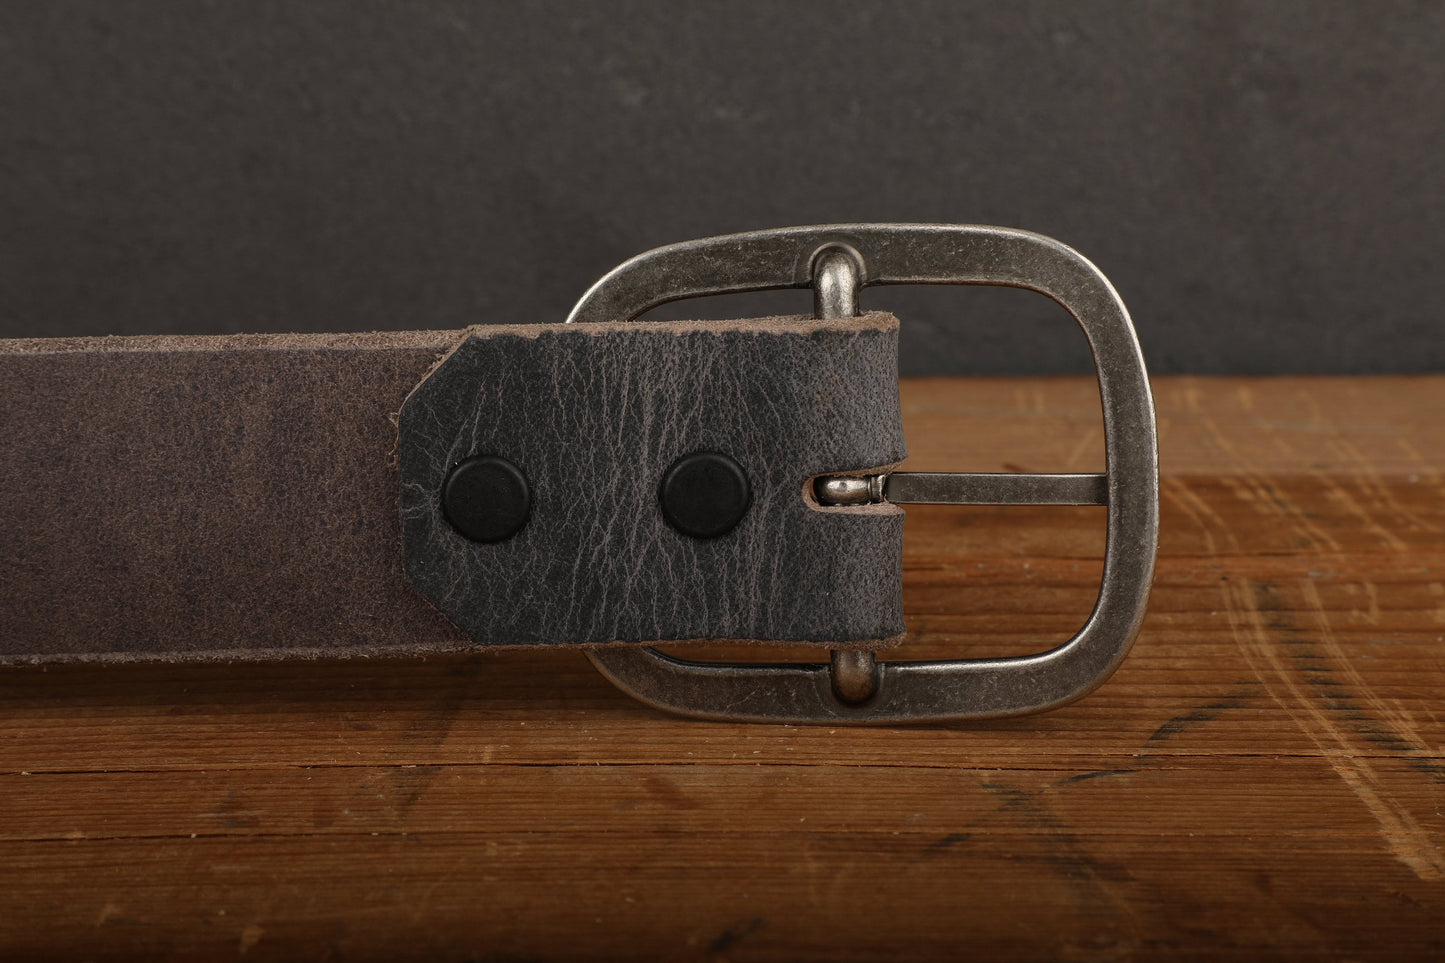 Steel Grey Leather Belt with Antique Brass Buckle